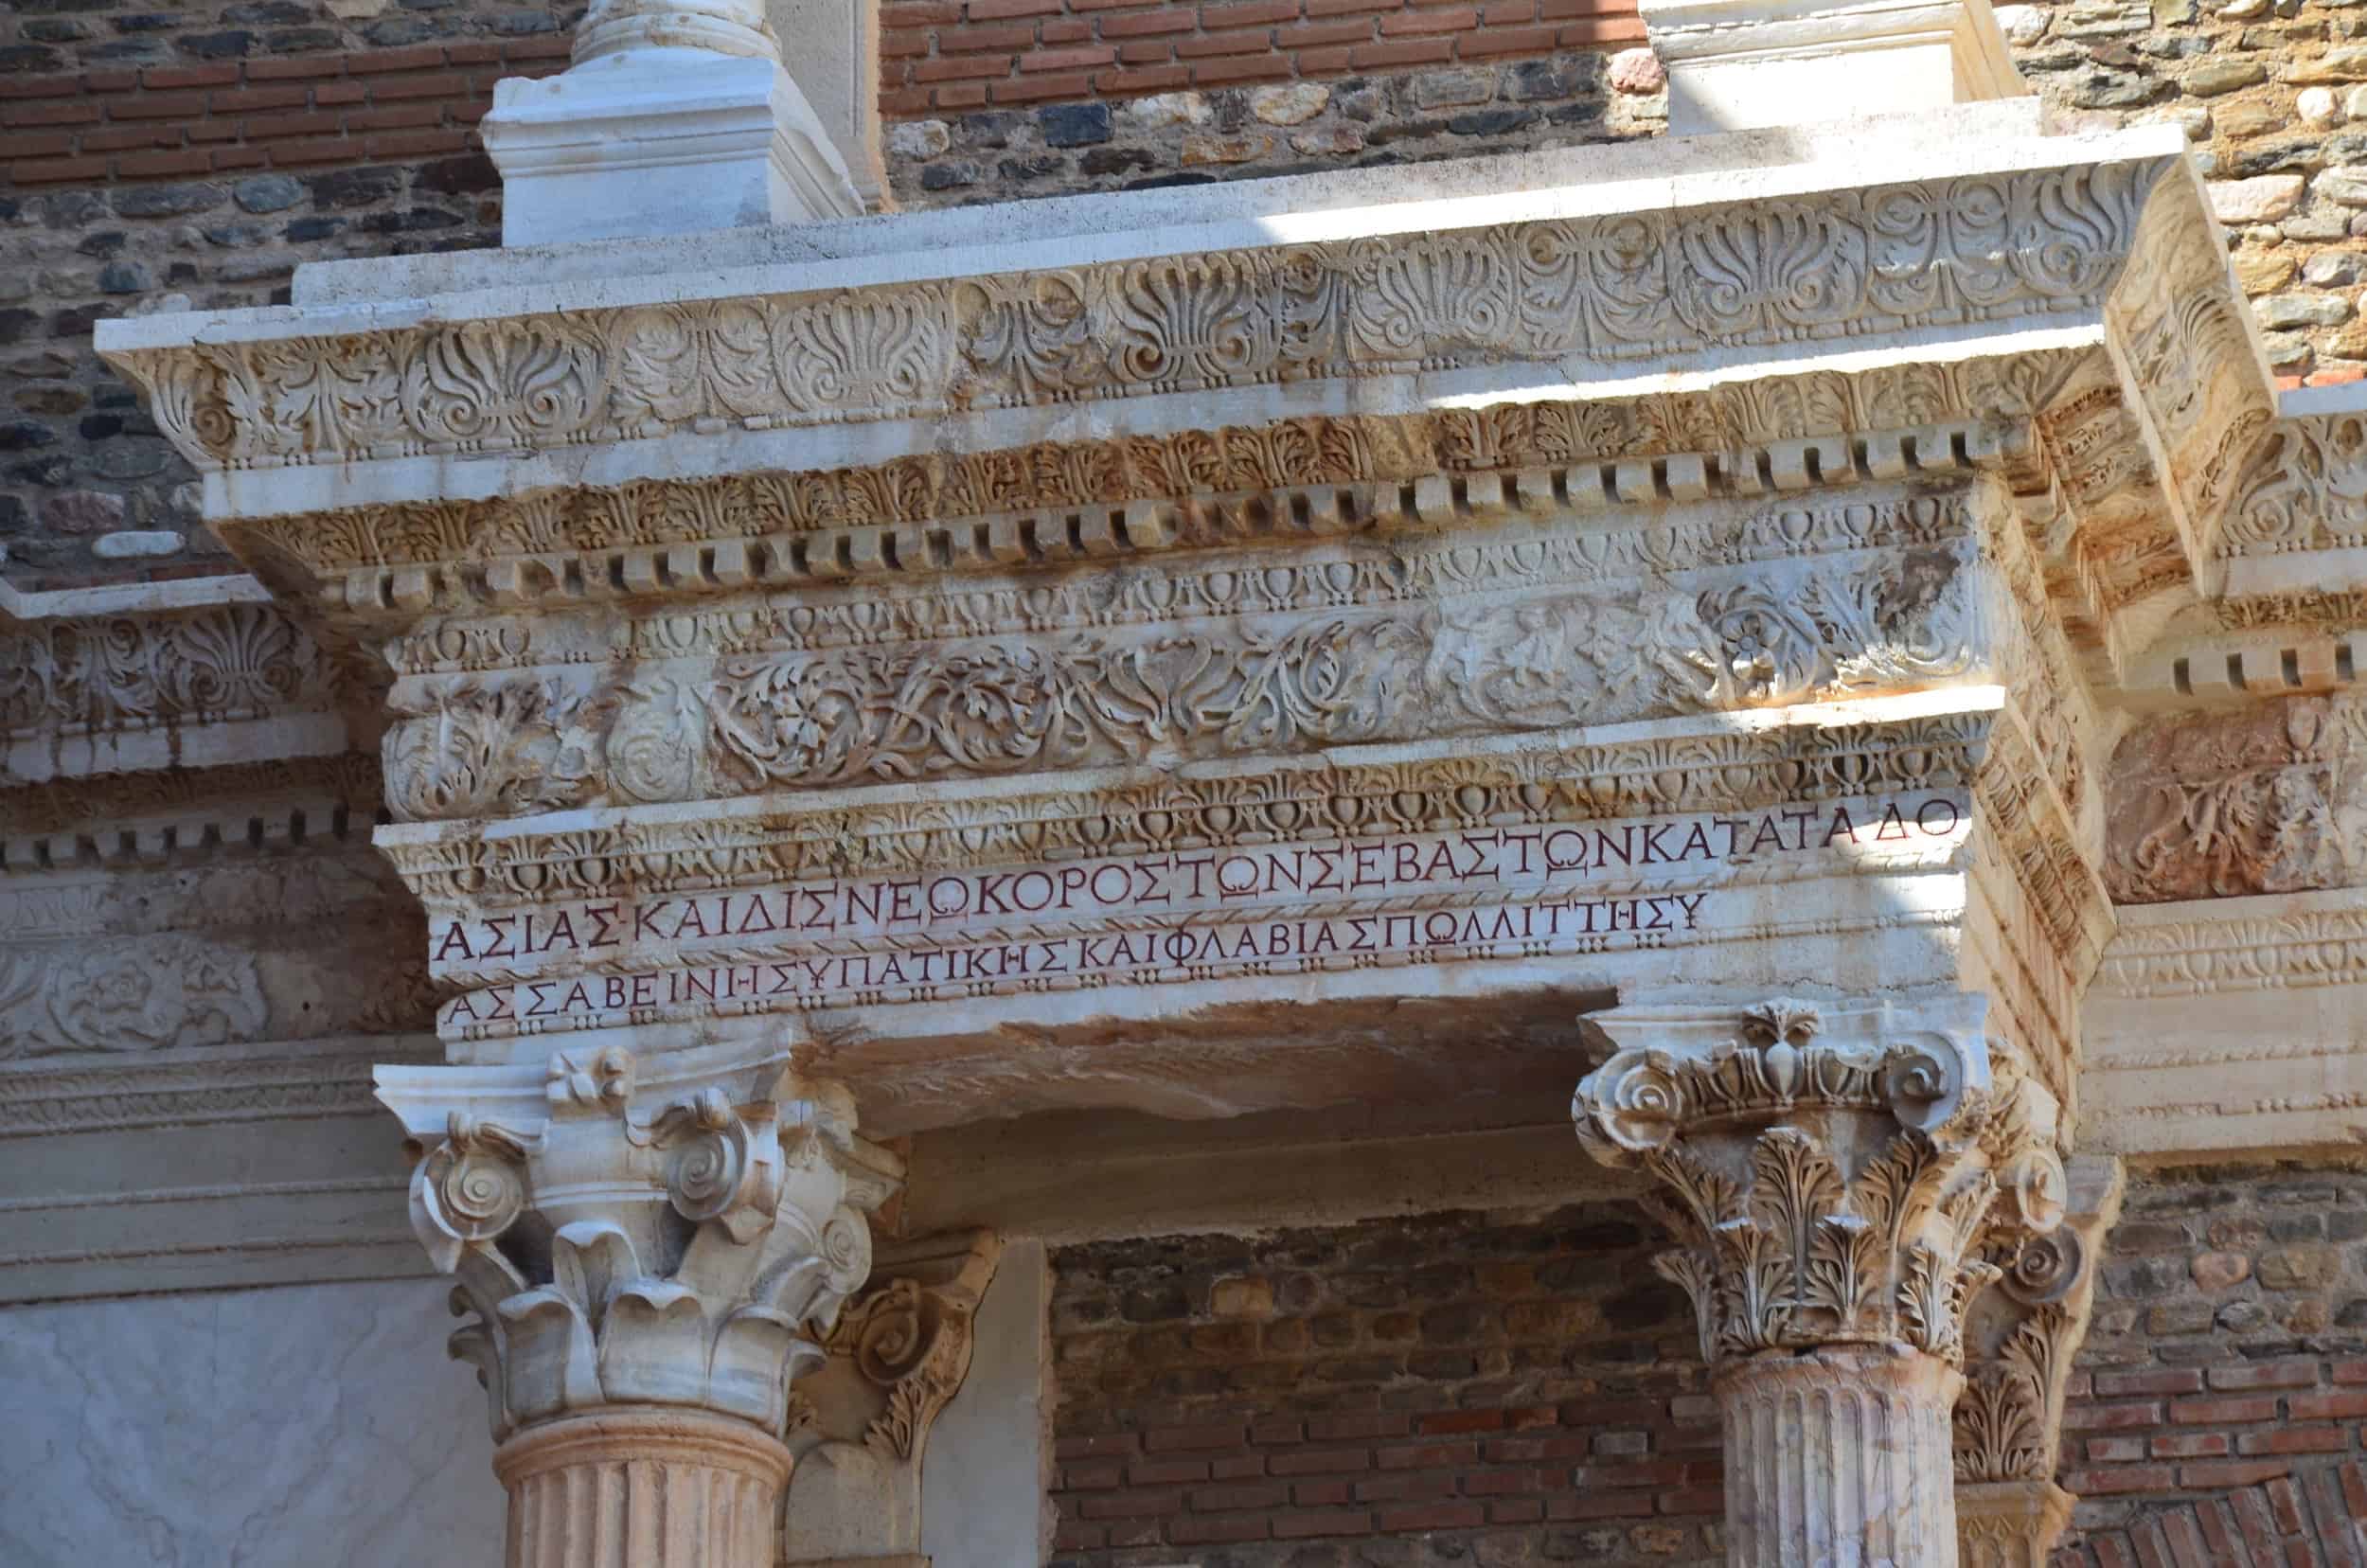 Pediment with inscription in the Marble Court